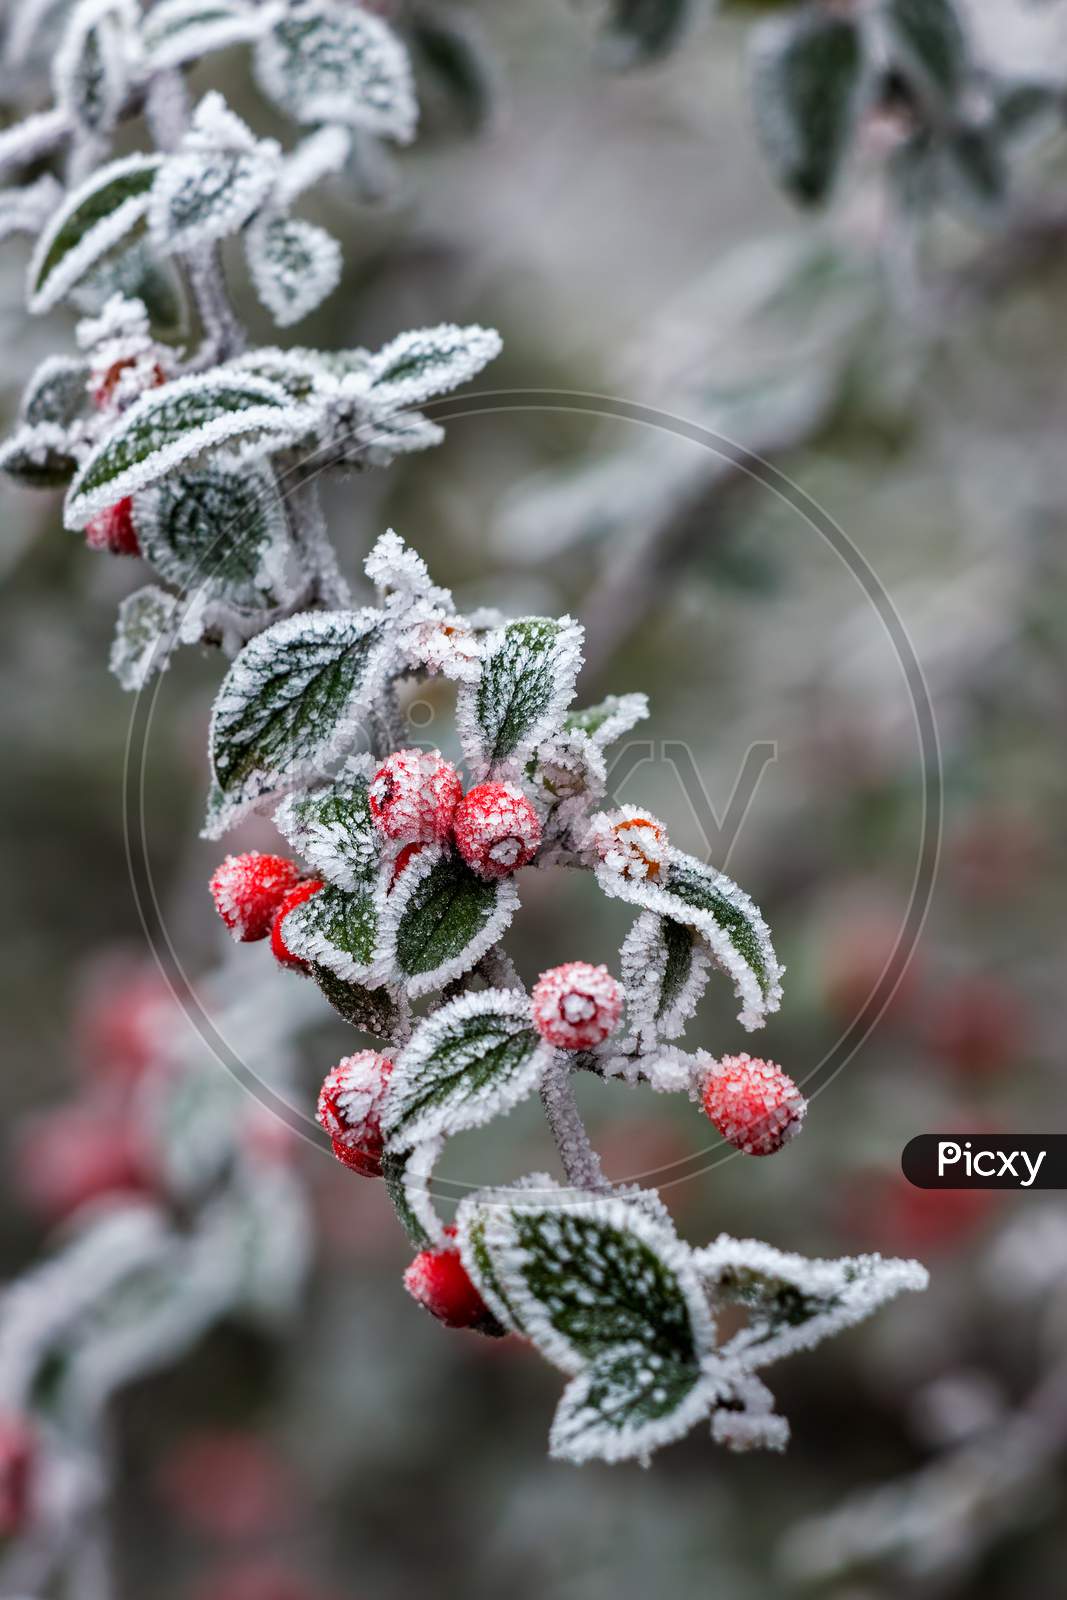 Red Cotoneaster Berries Covered With Hoar Frost On A Cold Winters Day